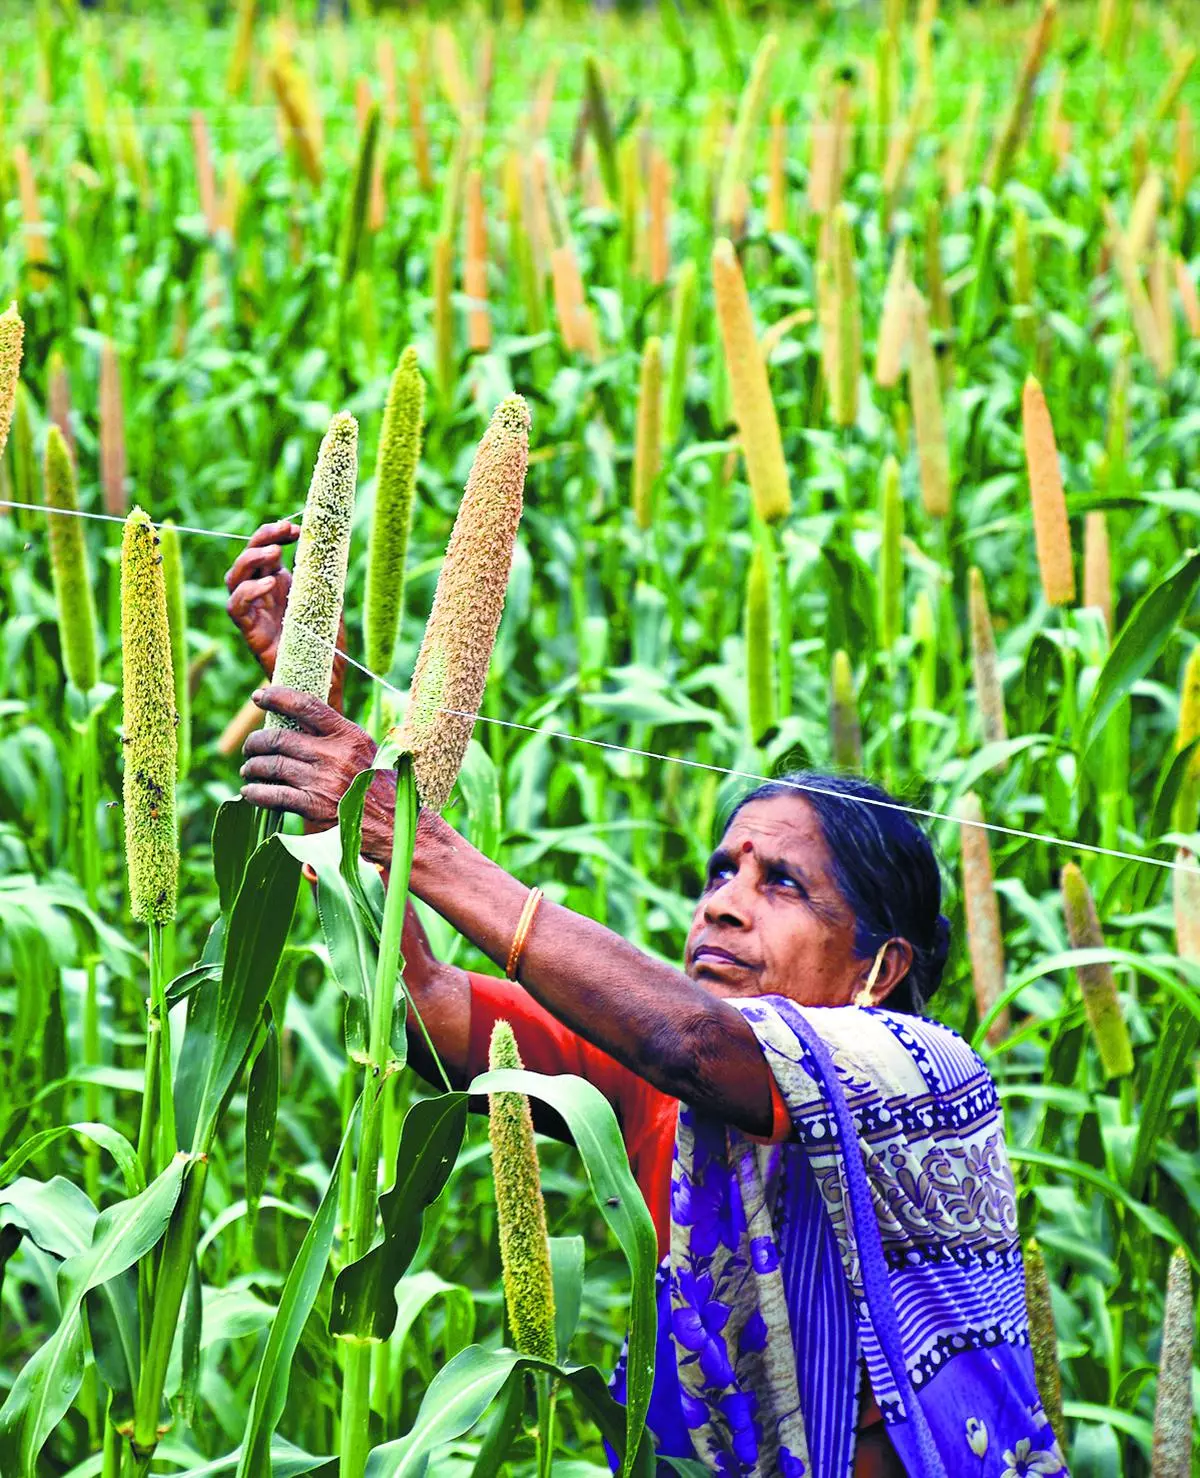 Millet production has remained stagnant over the last decade